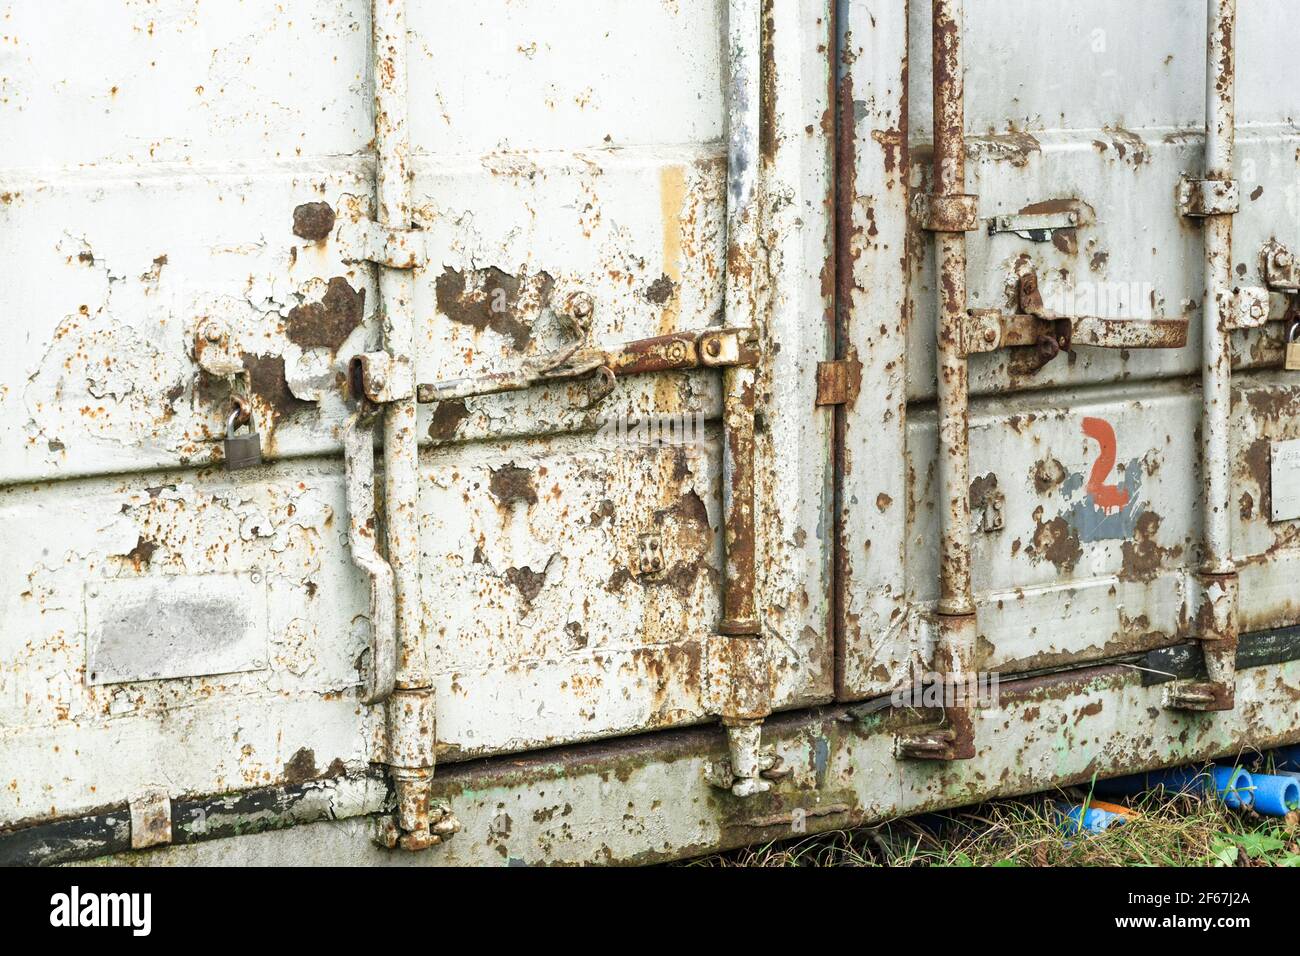 Old damaged rusty shipping container locking system, Stock Photo